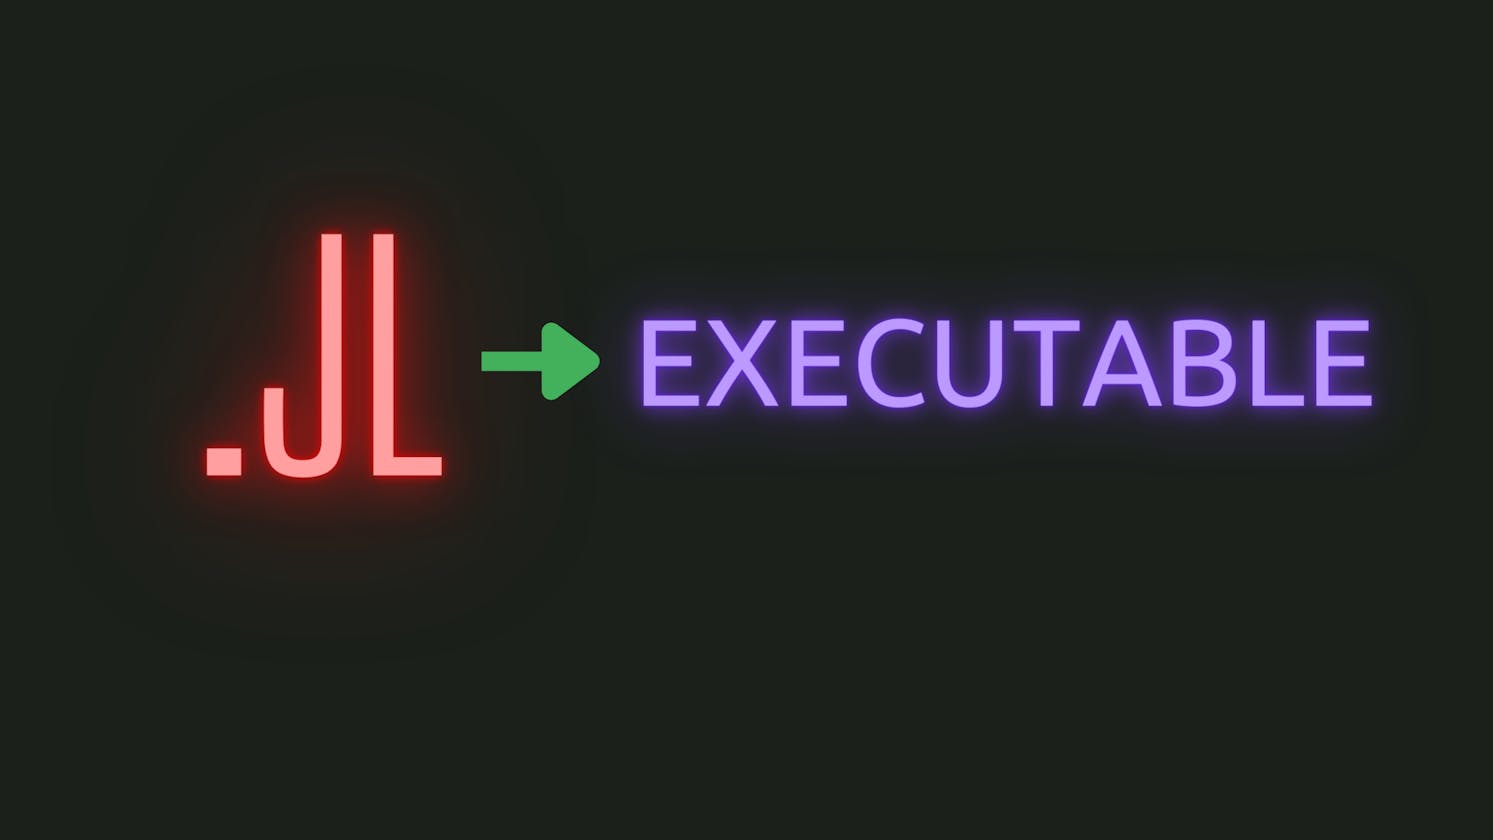 Convert your Julia Project into an Executable